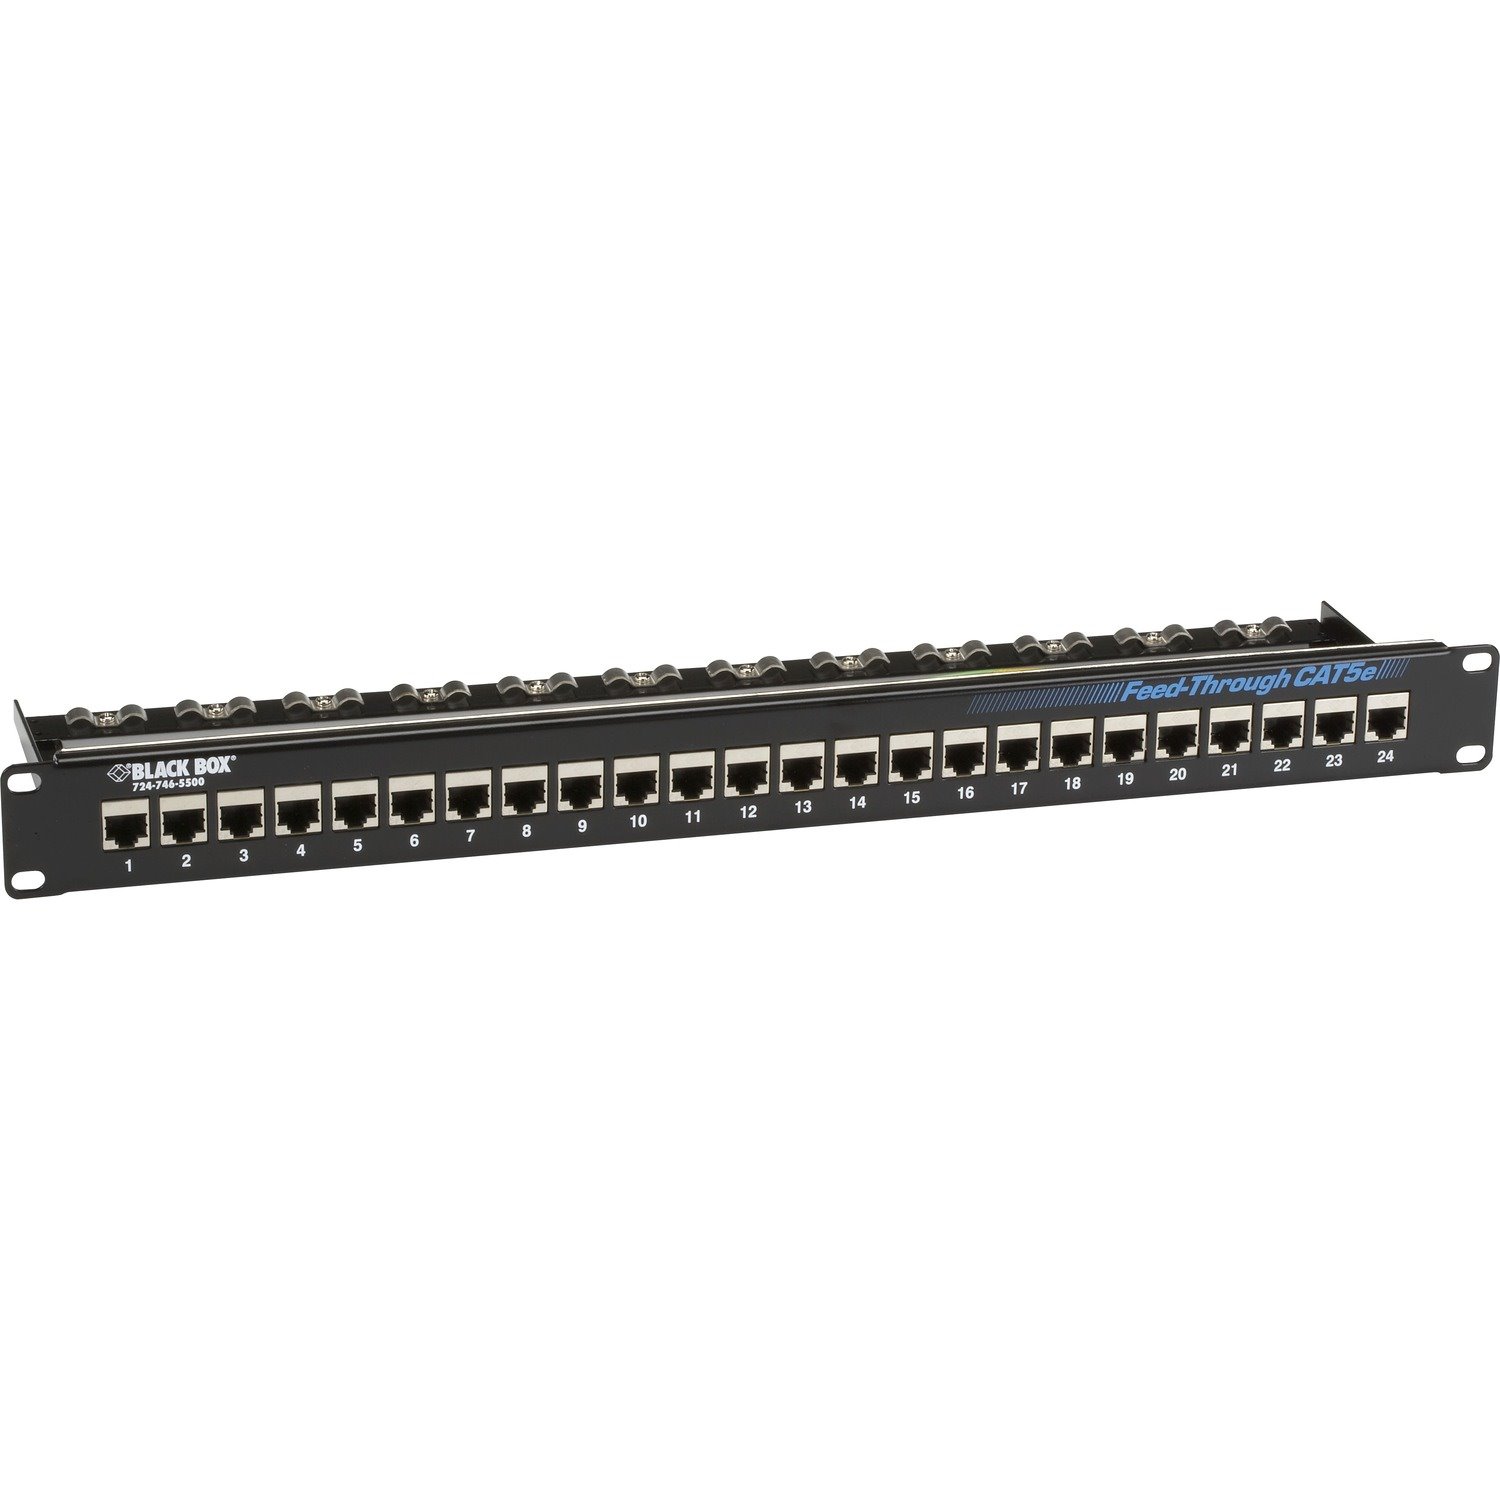 Black Box Jpm804a-R2 Patch Panel (Feed Through Patch Panel - Shielded - 24 Port [1Year Warranty])